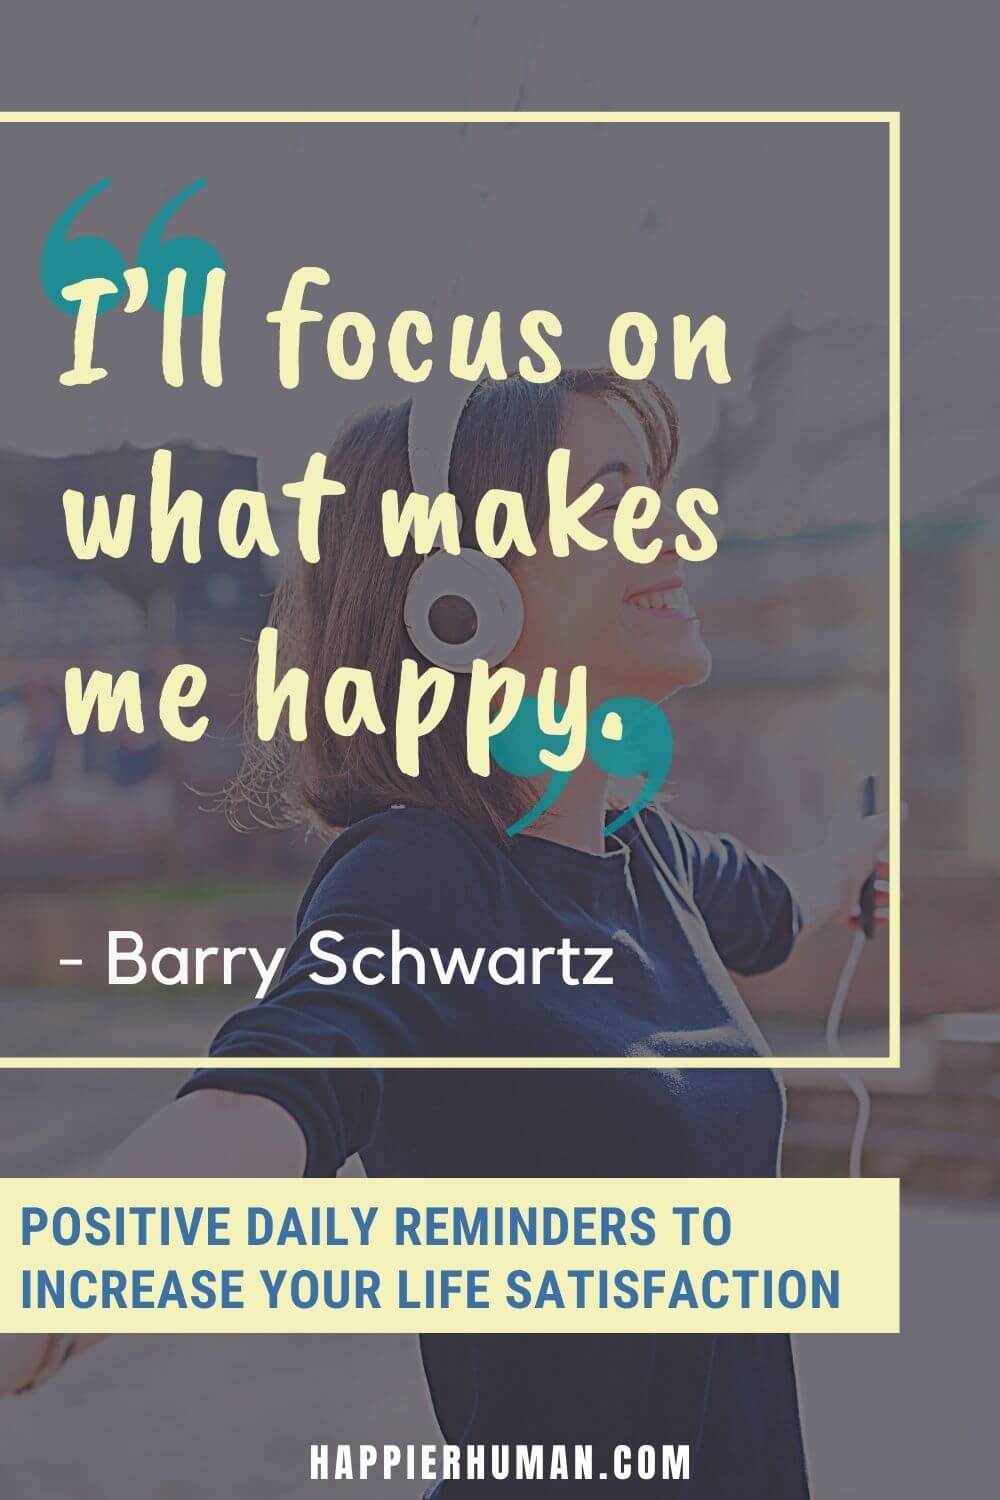 Positive Reminders - “I’ll focus on what makes me happy.” Barry Schwartz | positive self reminders | positive morning reminders | positive simple reminders